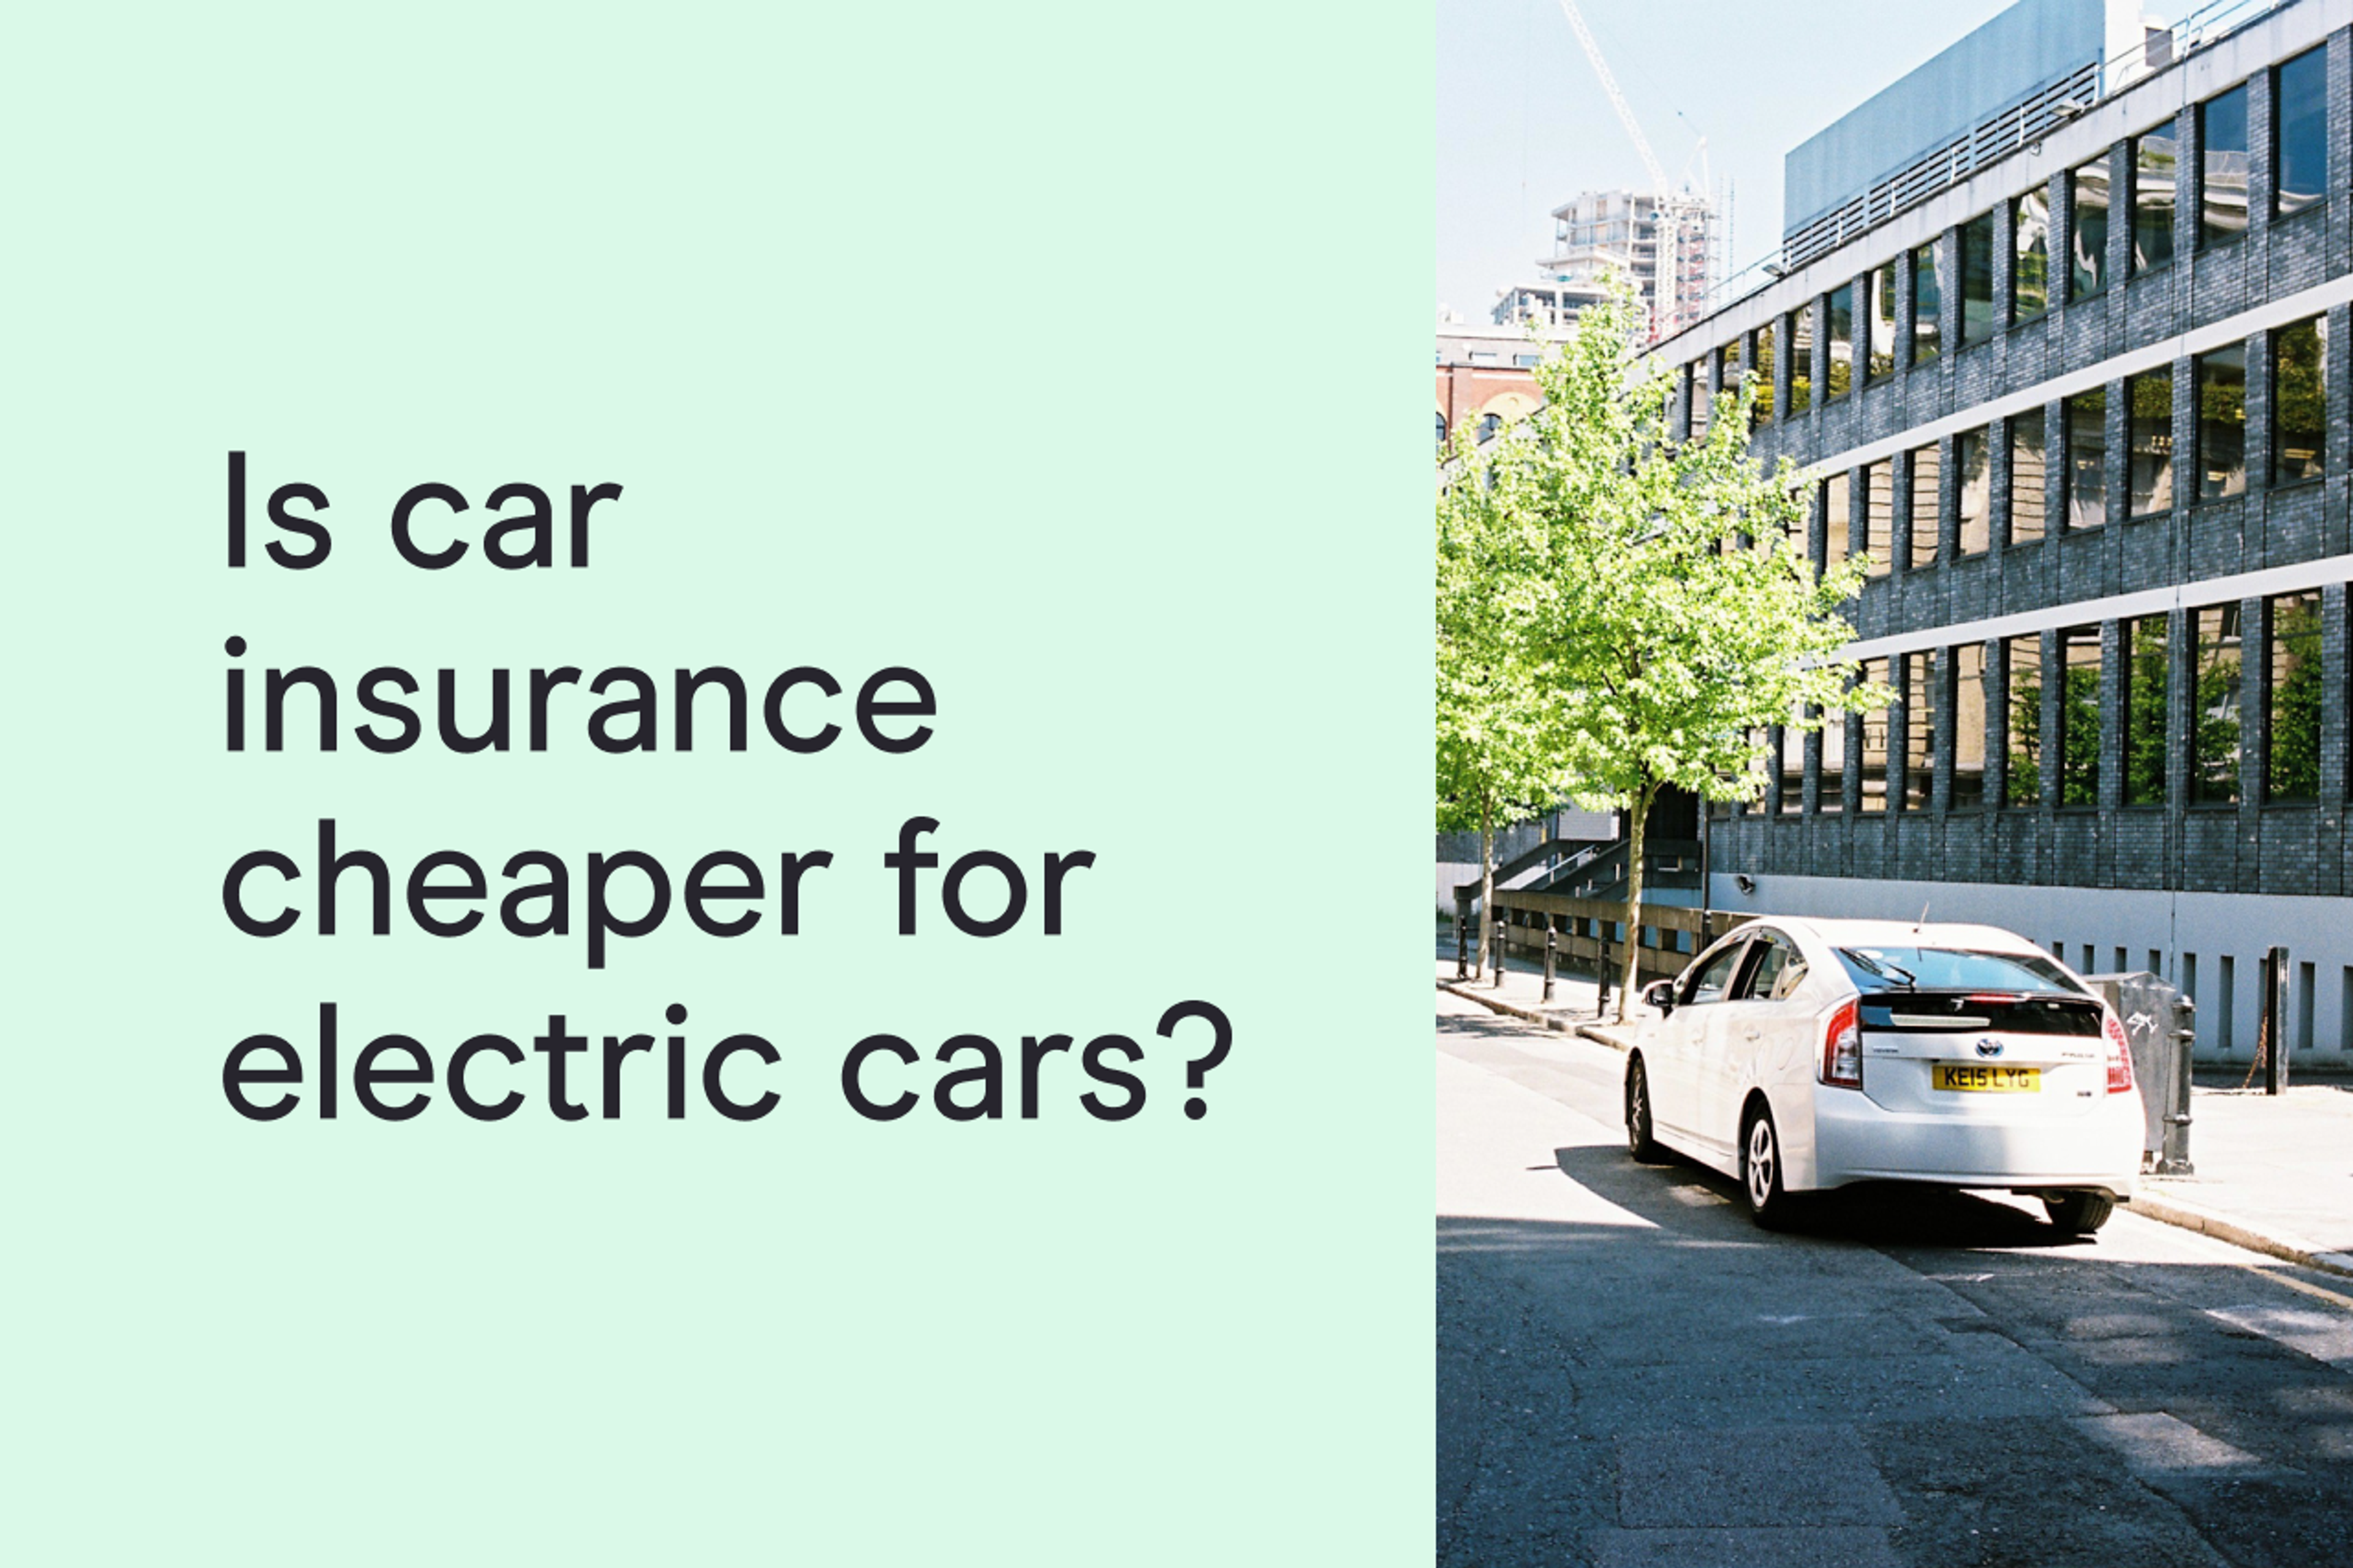 Insurance cheaper on electric cars featured image